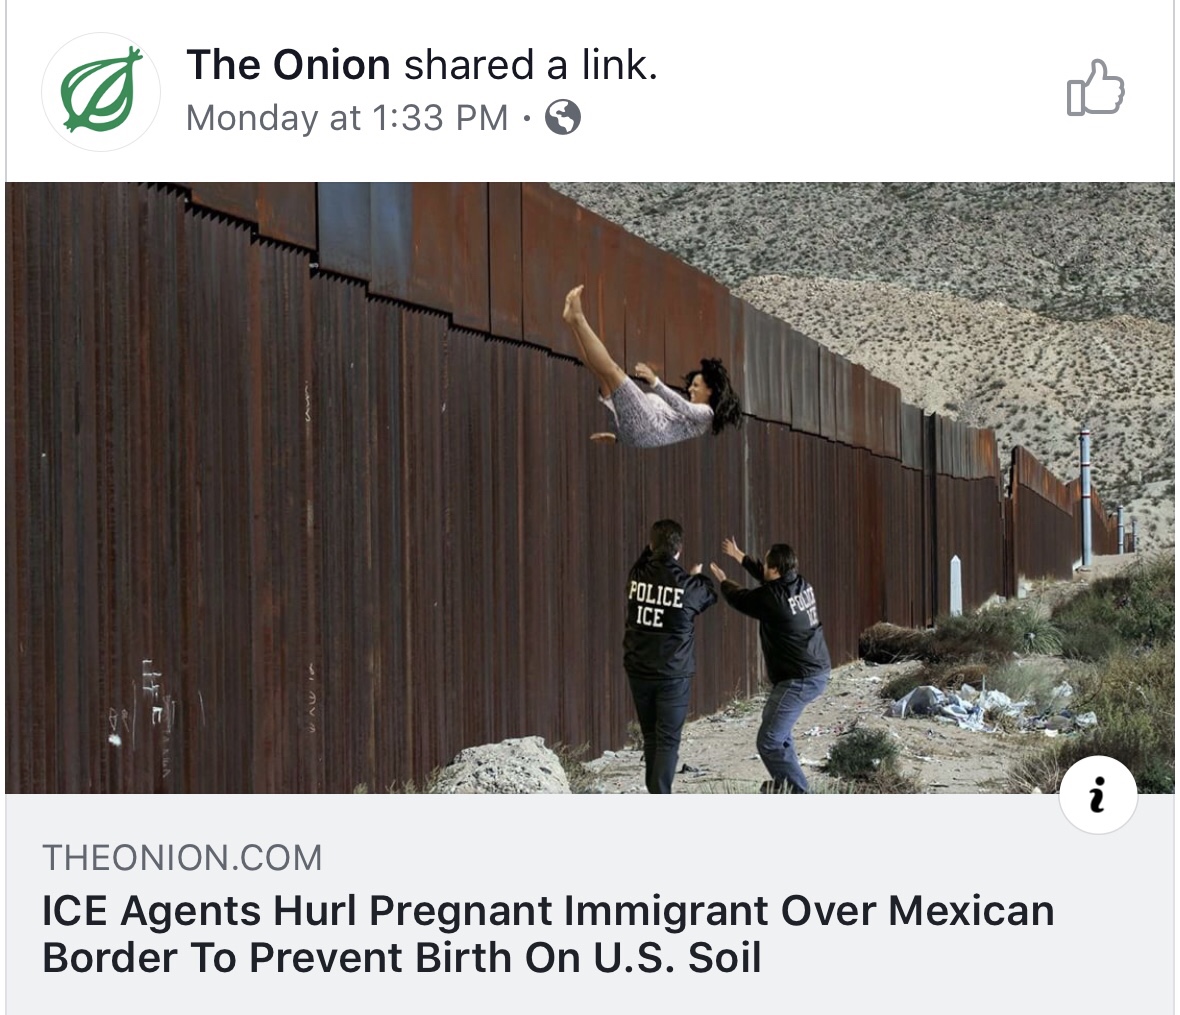 onion - The Onion d a link. Monday at Police Ice Theonion.Com Ice Agents Hurl Pregnant Immigrant Over Mexican Border To Prevent Birth On U.S. Soil